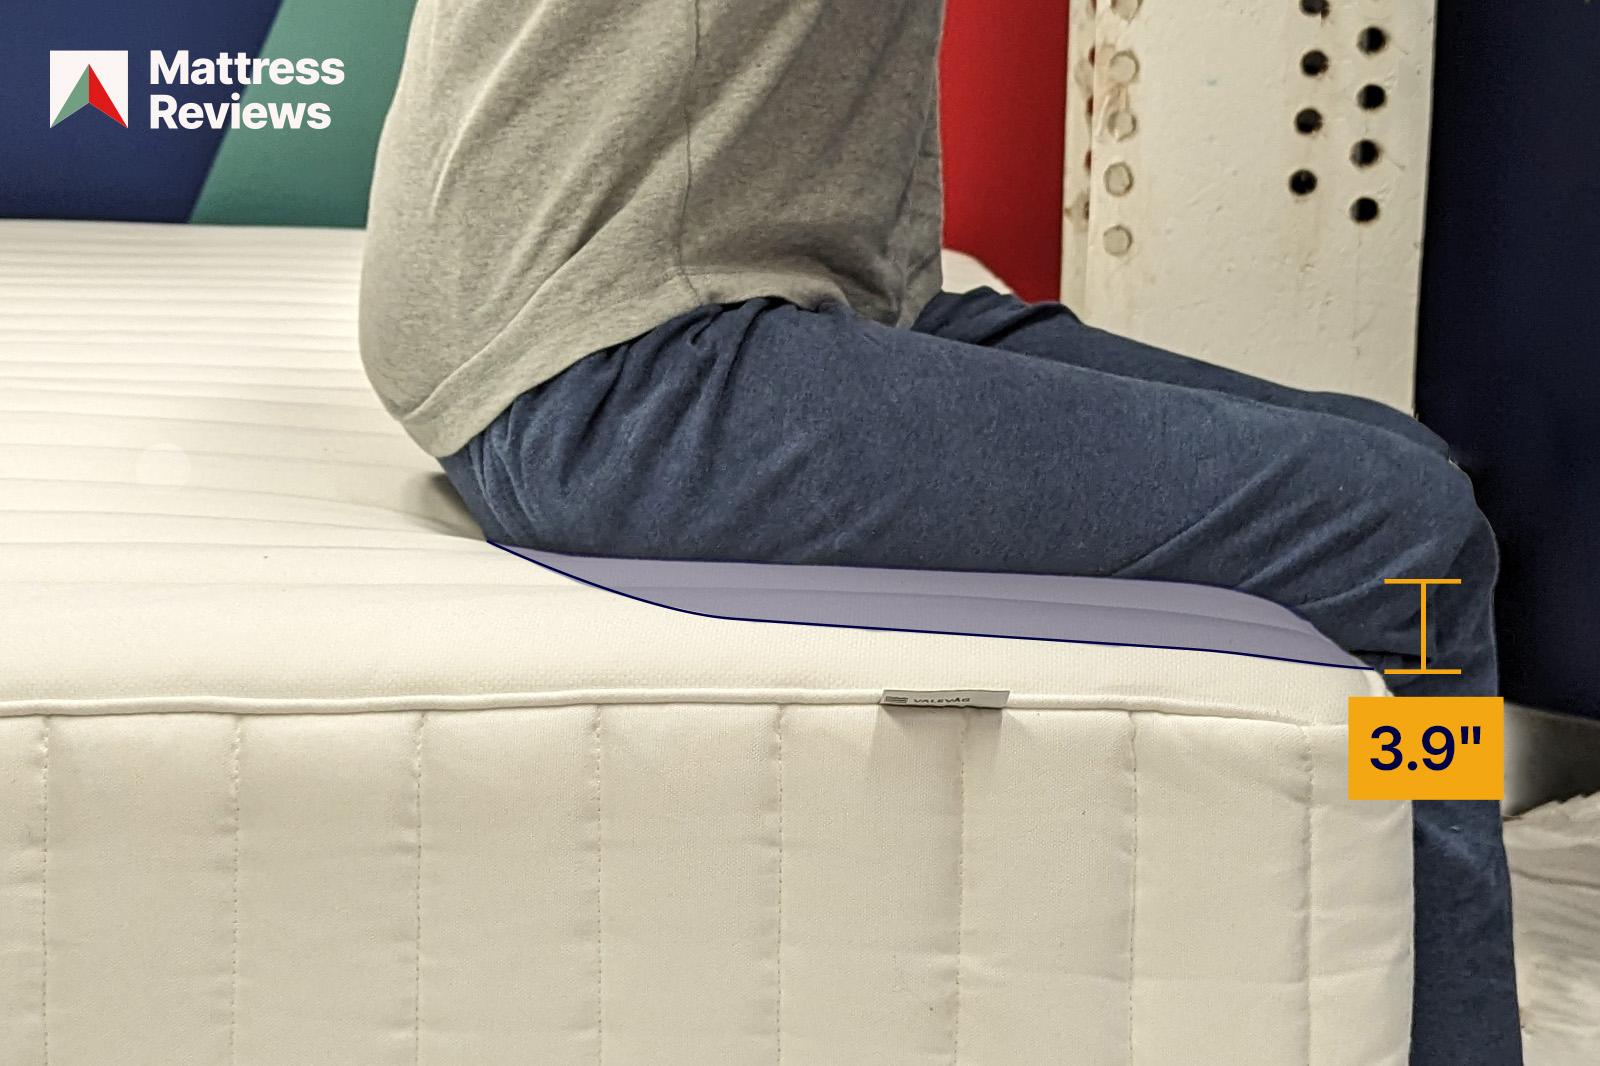 photo of a mannequin sitting on the edge of the IKEA Valevag mattress showing a displacement of 39